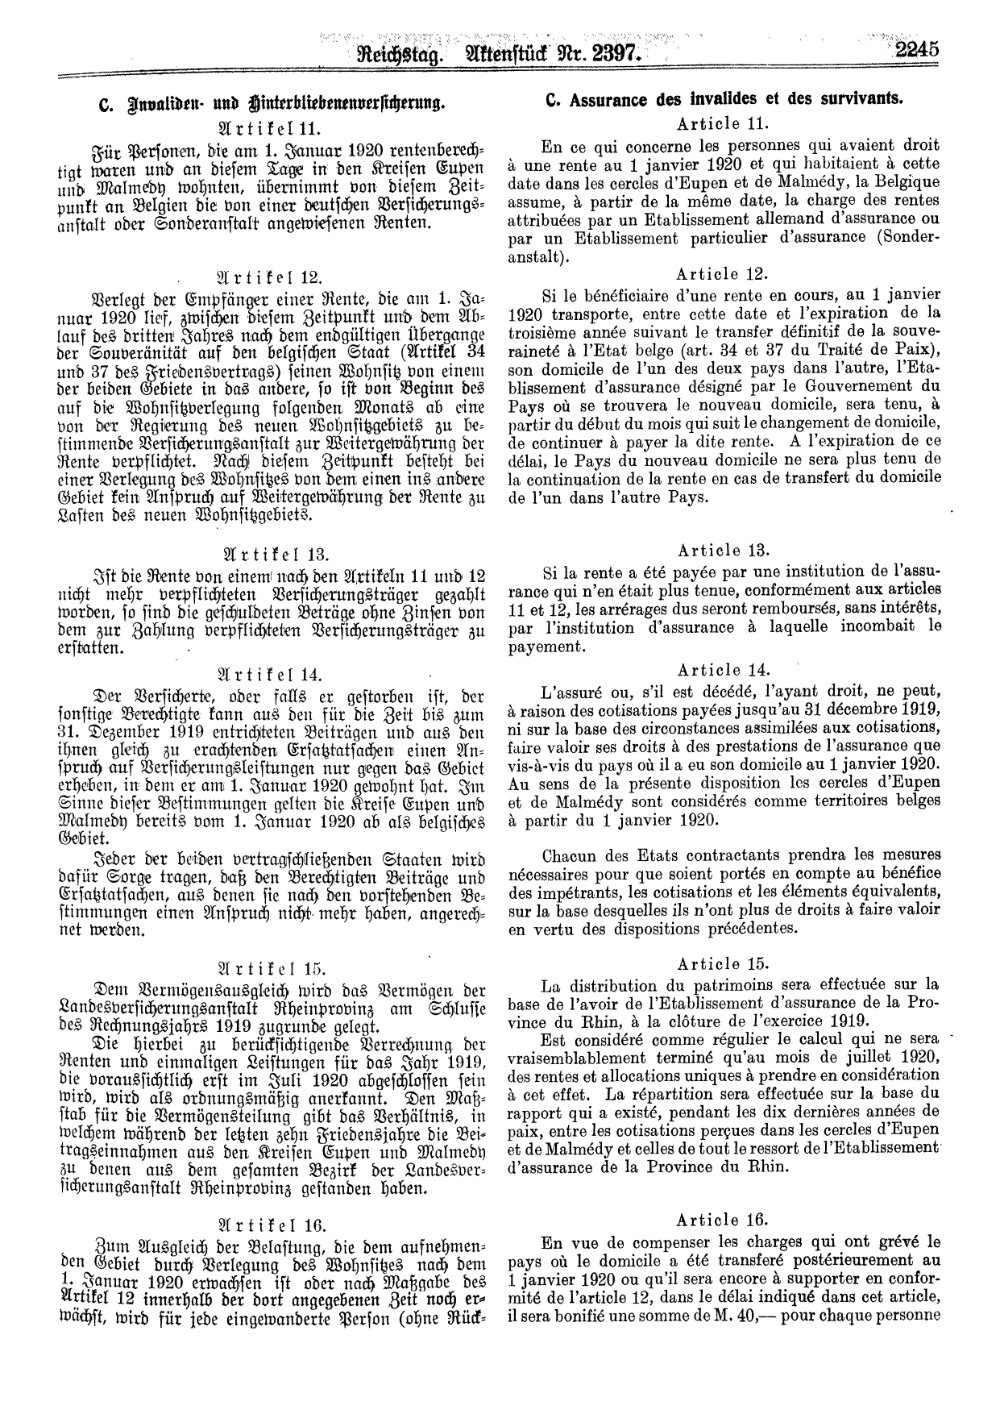 Scan of page 2245